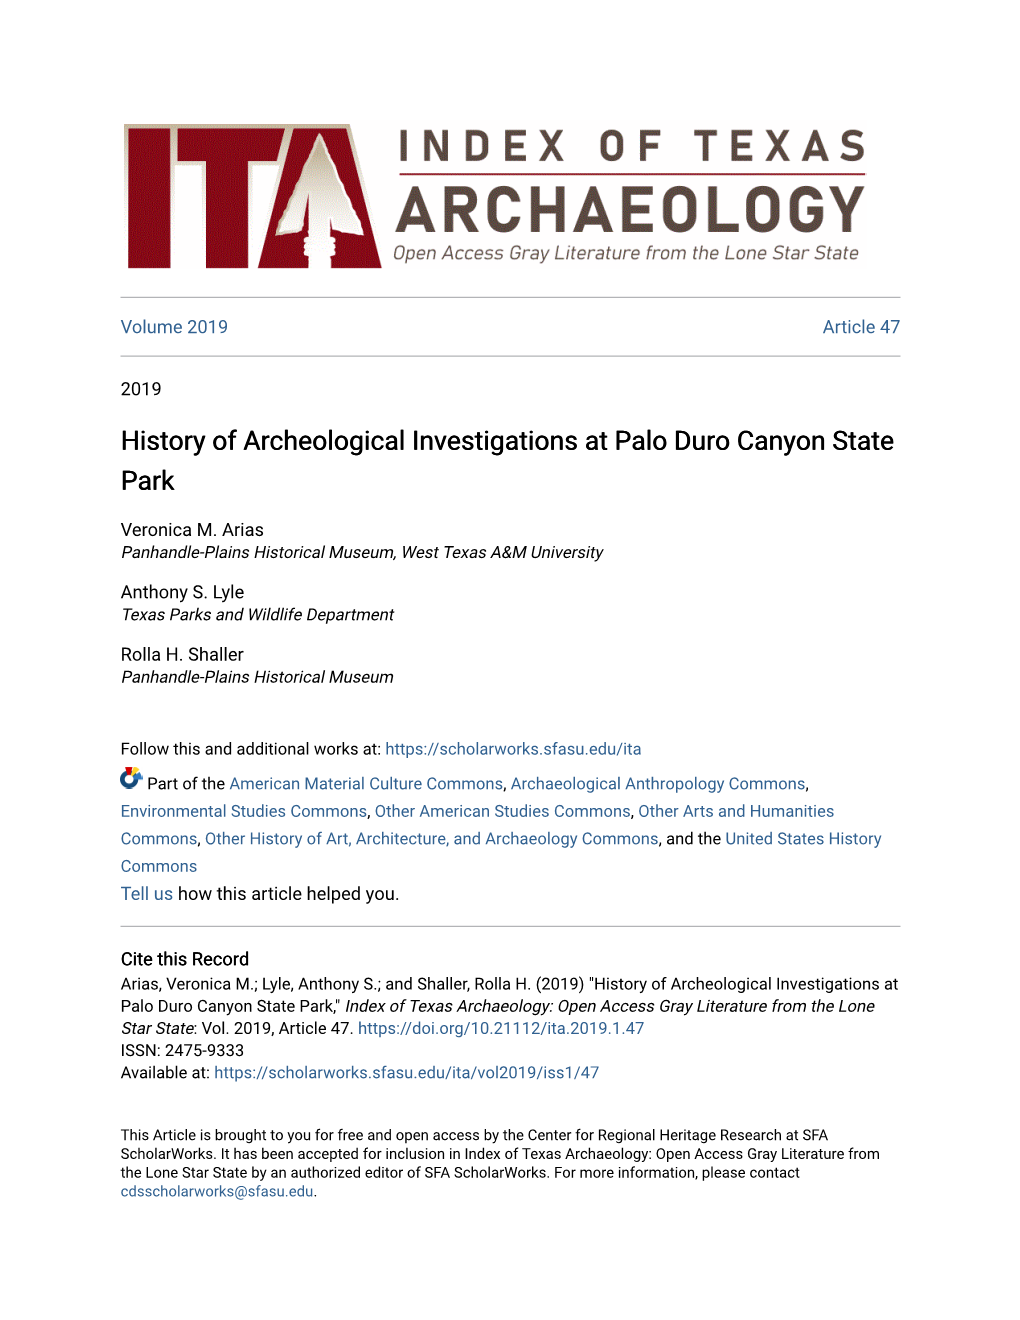 History of Archeological Investigations at Palo Duro Canyon State Park